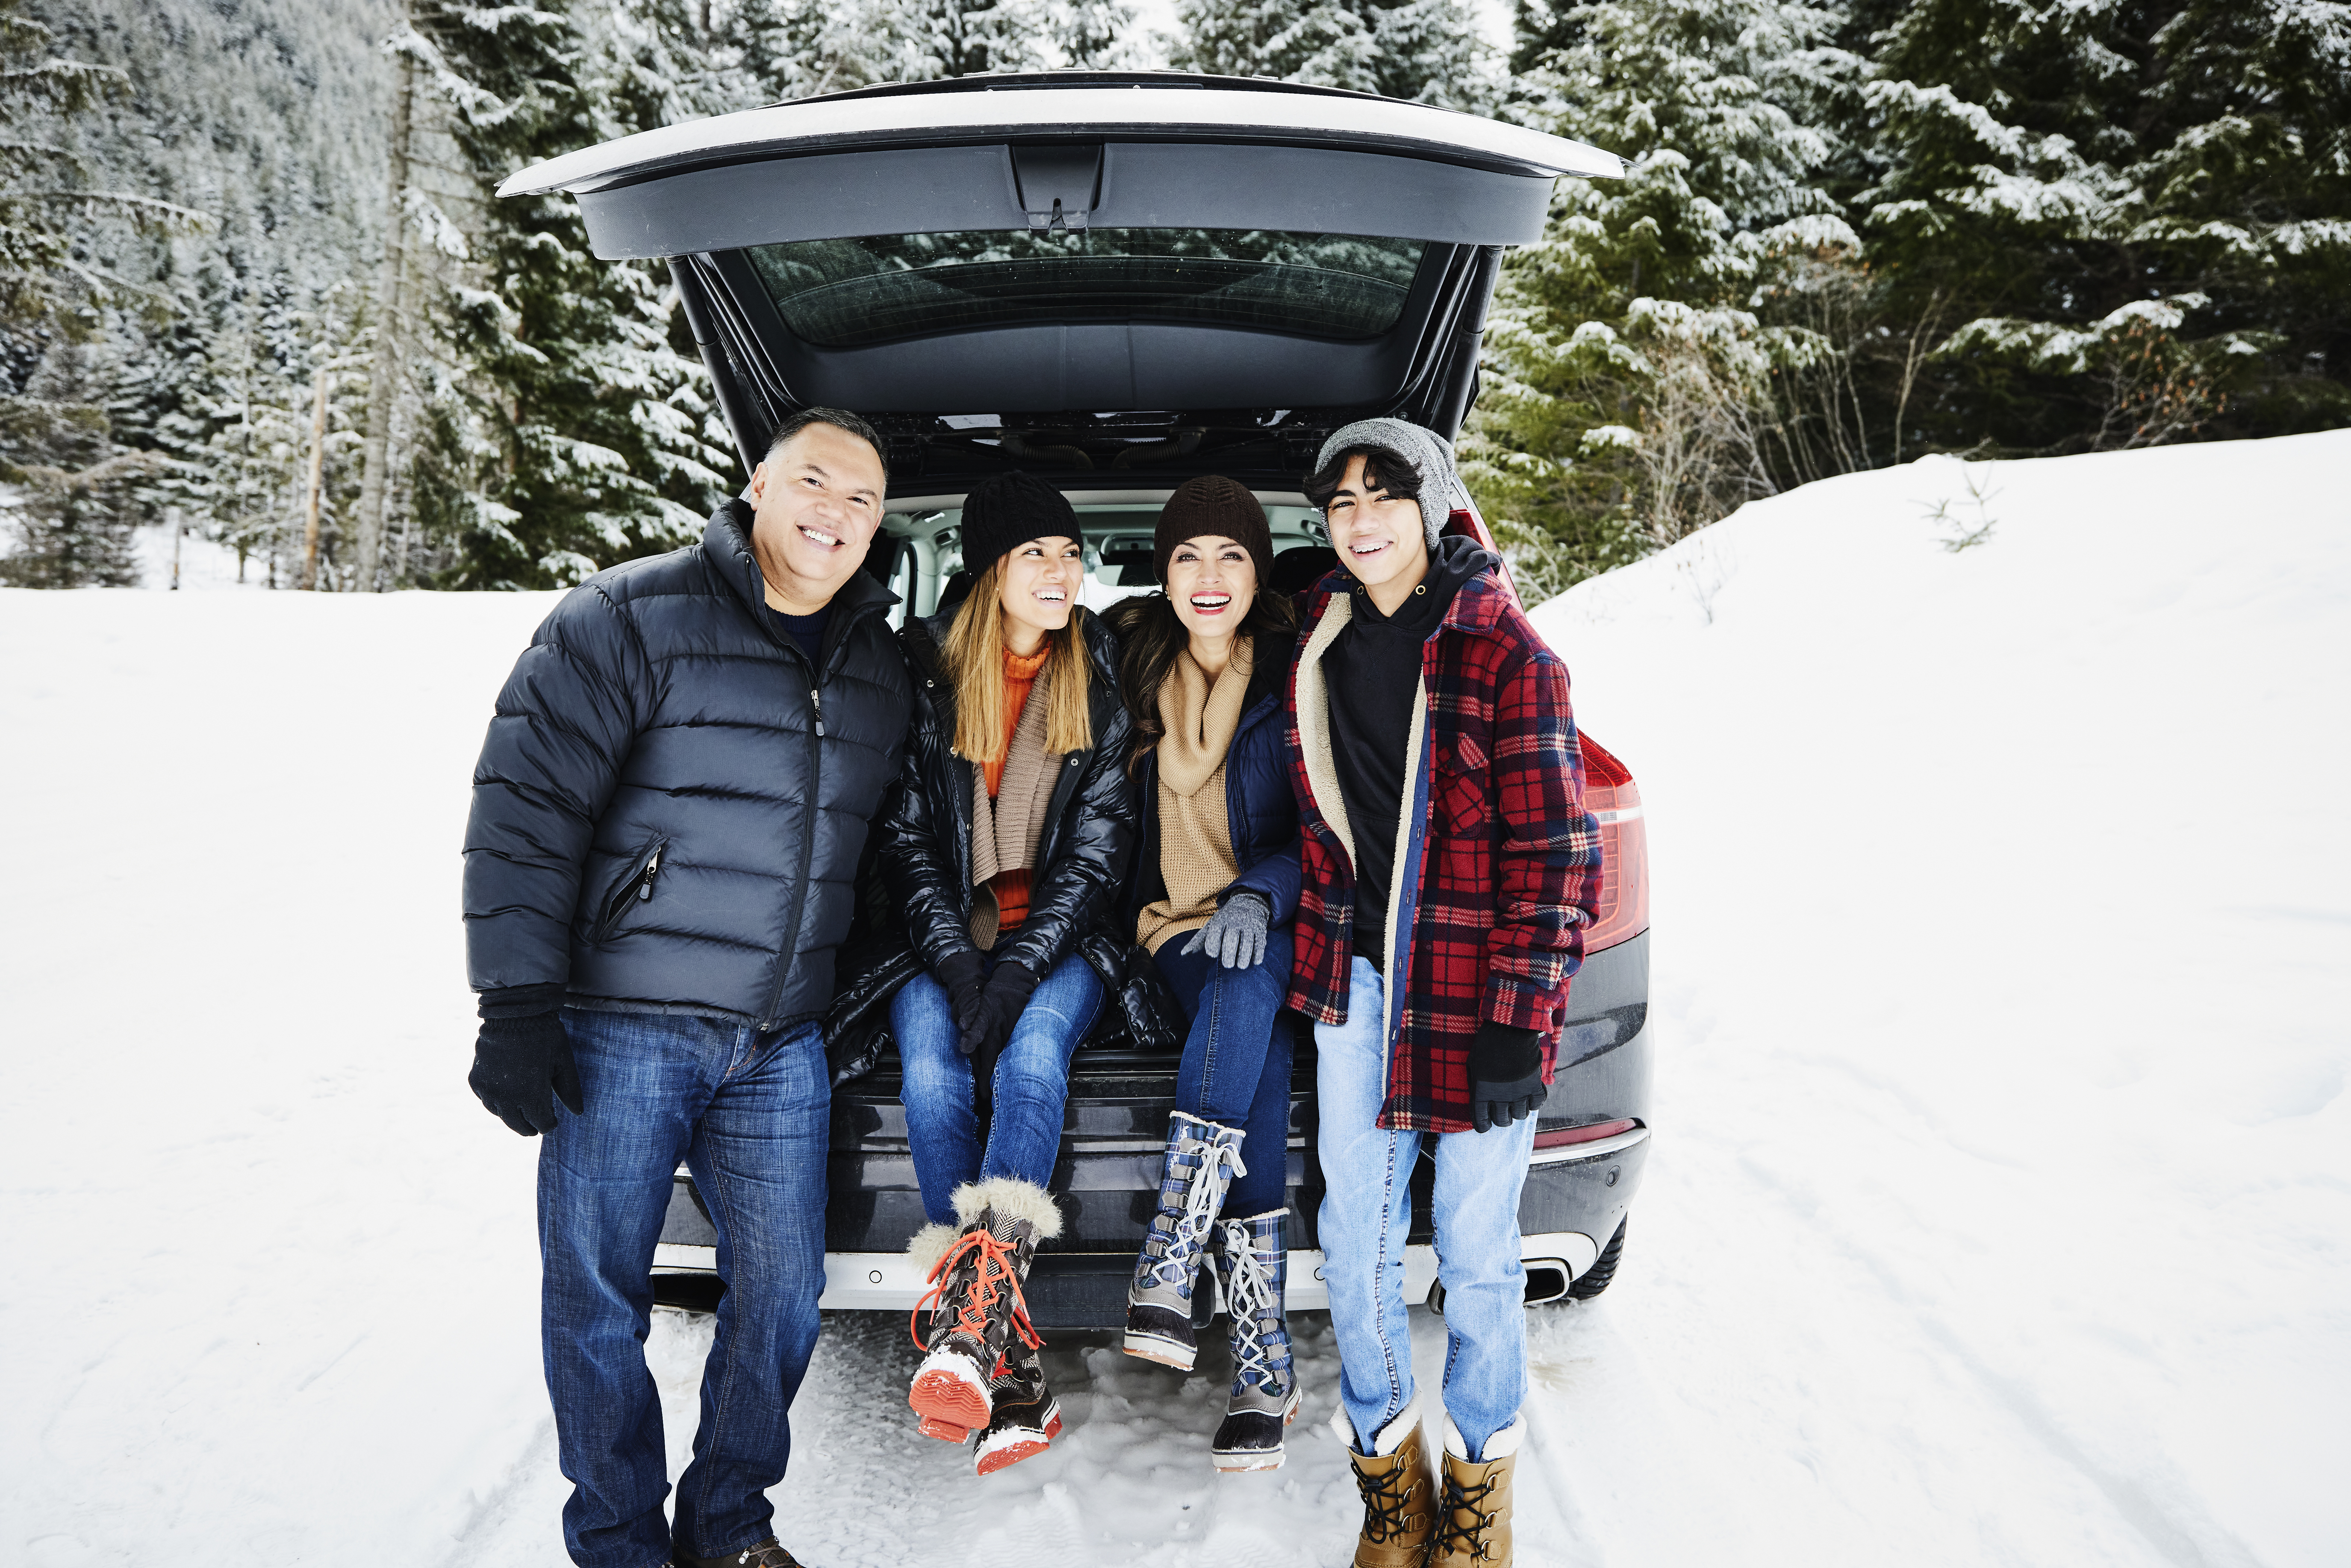 A family sitting in the trunk of their car in the snow | Source: Getty Images